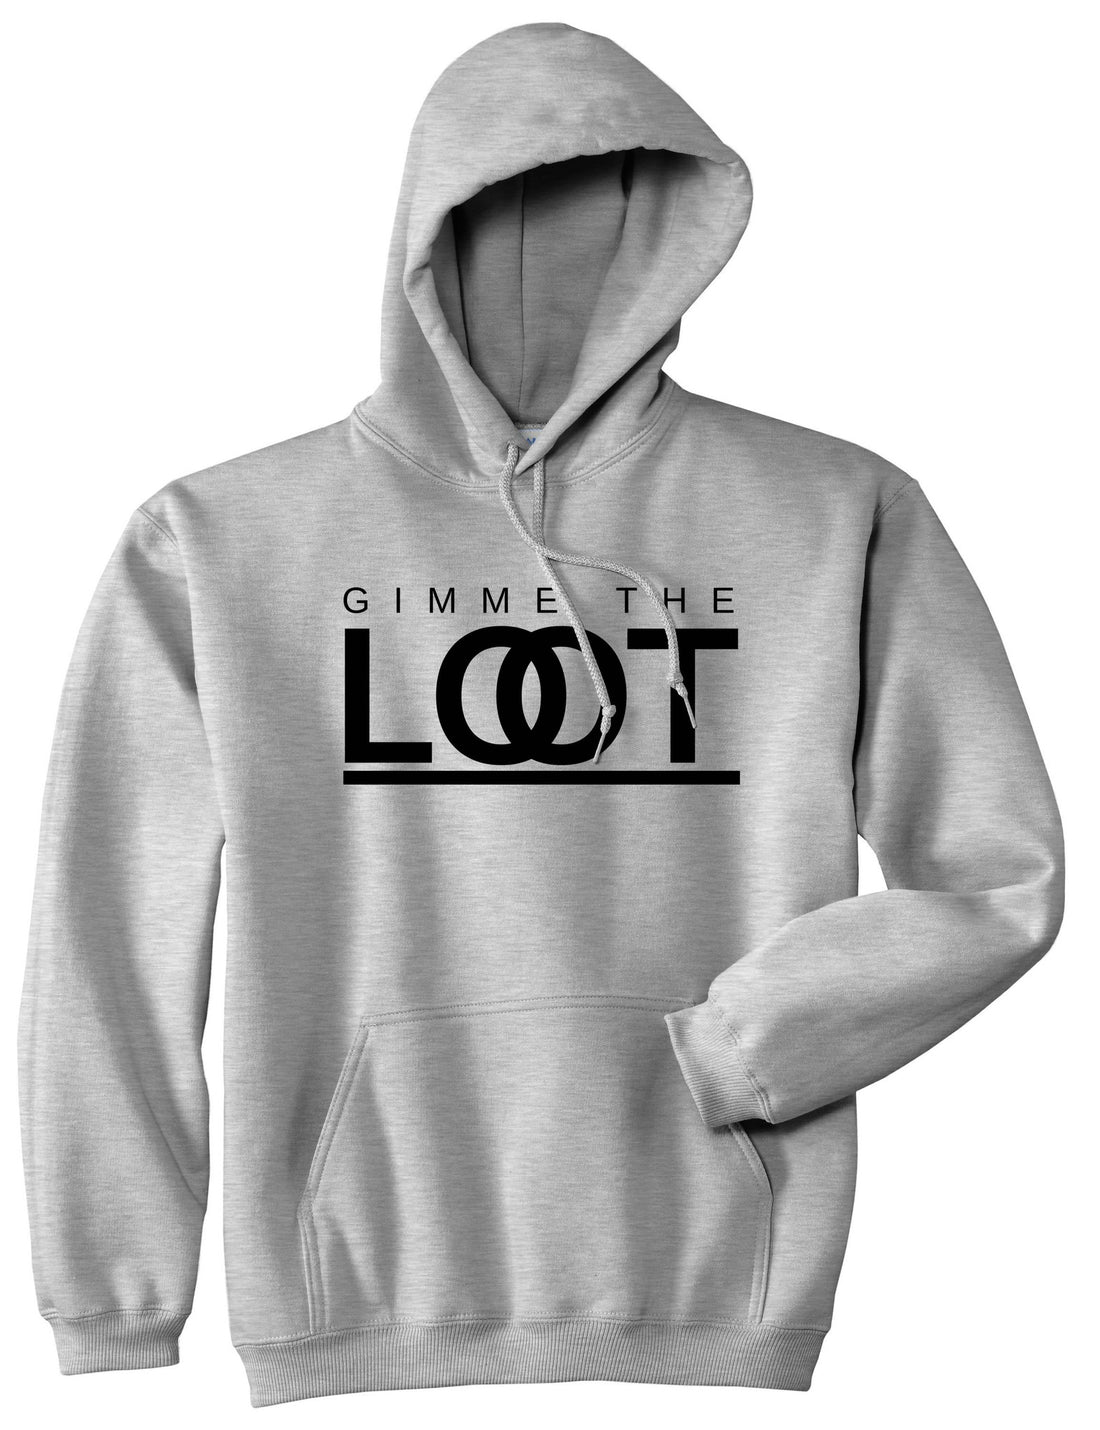 Gimme The Loot  Pullover Hoodie in Grey By Kings Of NY